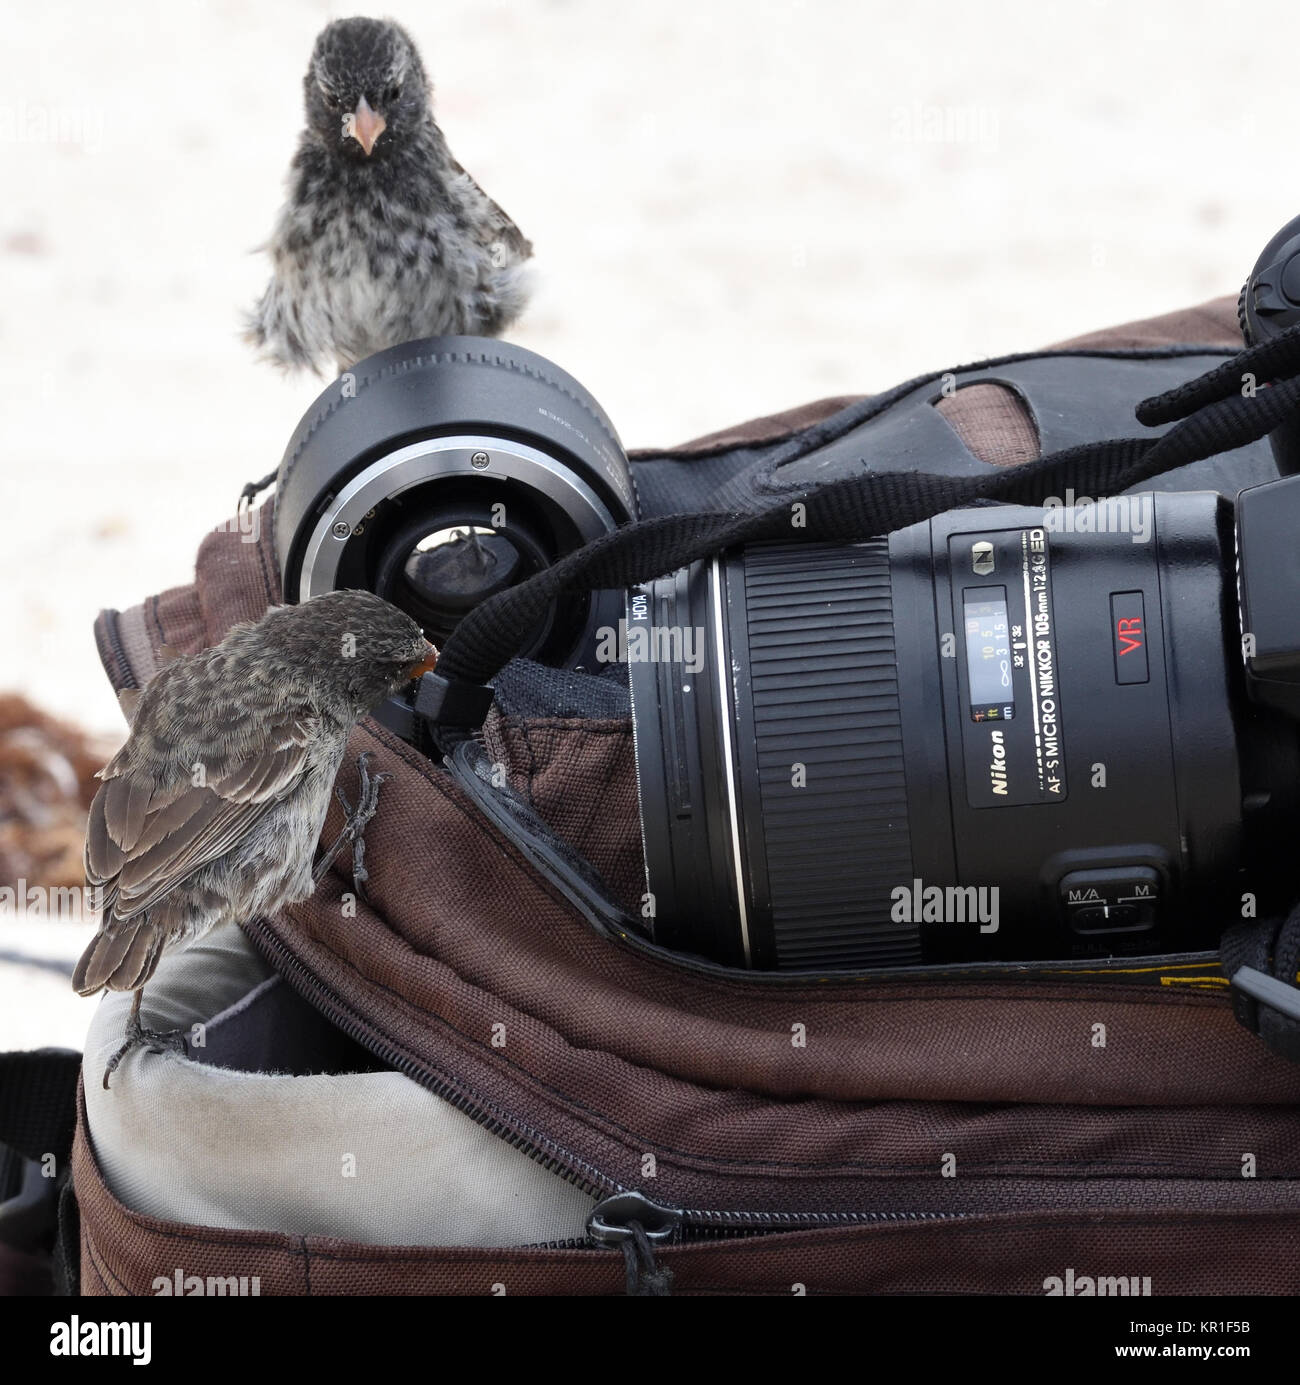 Female medium ground finches (Geospiza fortis) investigate a camera bag. This species is endemic to Galapagos. San Cristóbal, Galapagos, Ecuador. Stock Photo